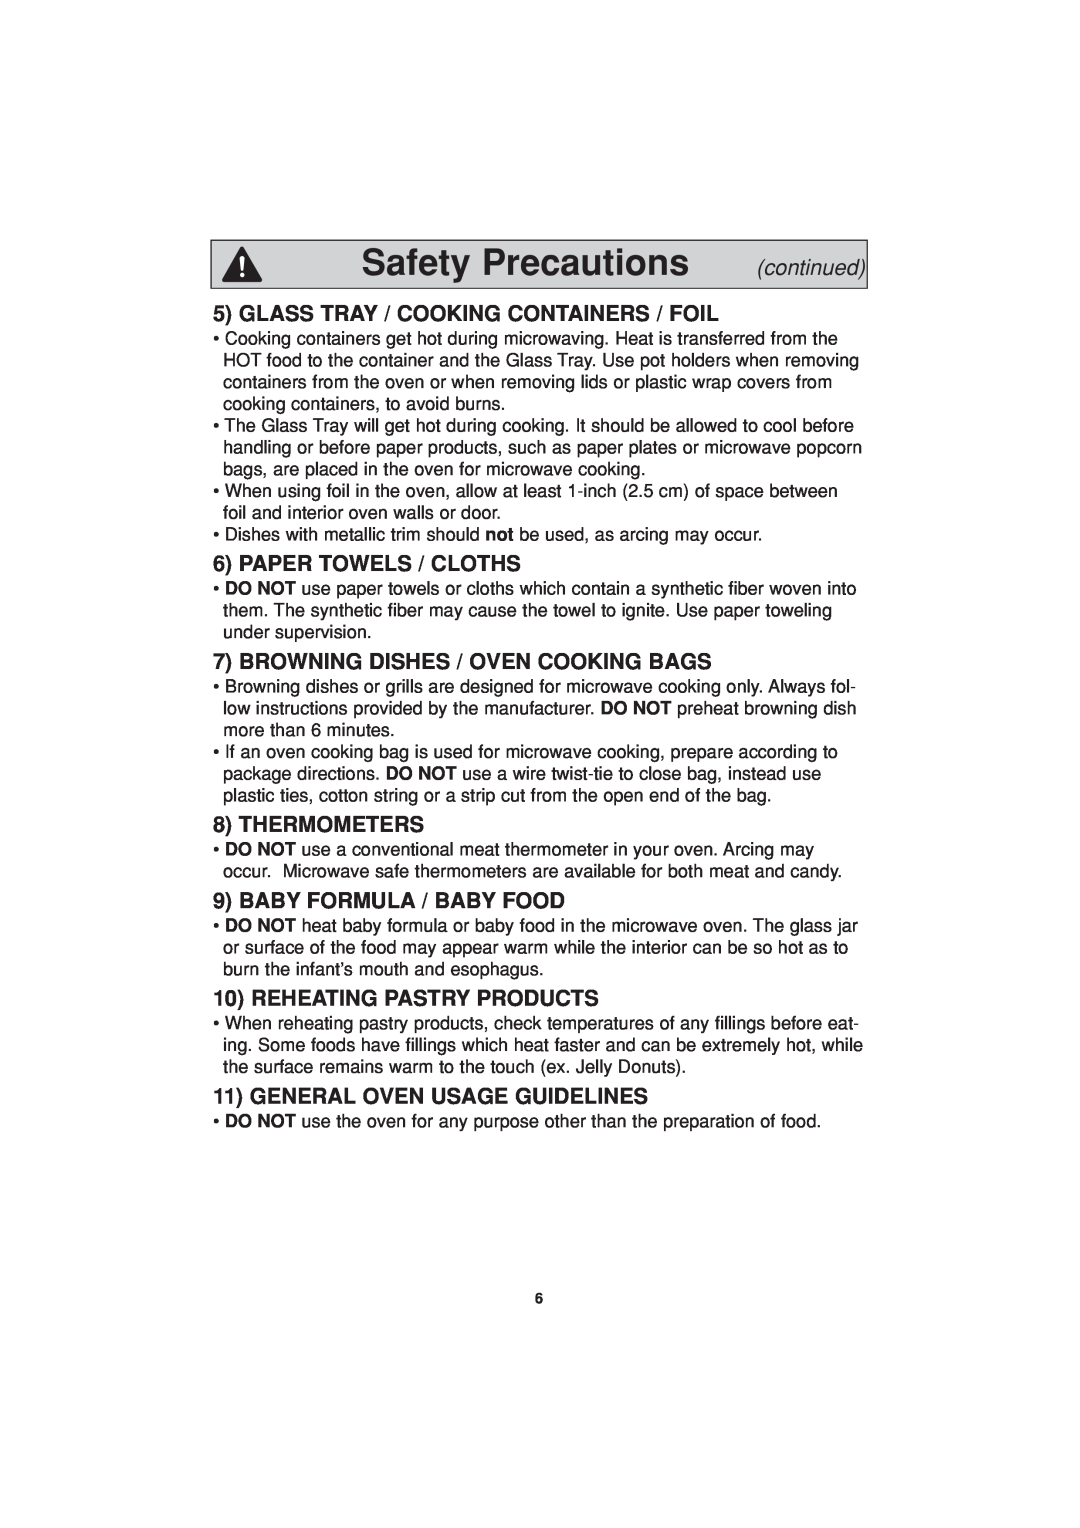 Panasonic NN-H624 Safety Precautions, Glass Tray / Cooking Containers / Foil, Paper Towels / Cloths, Thermometers 